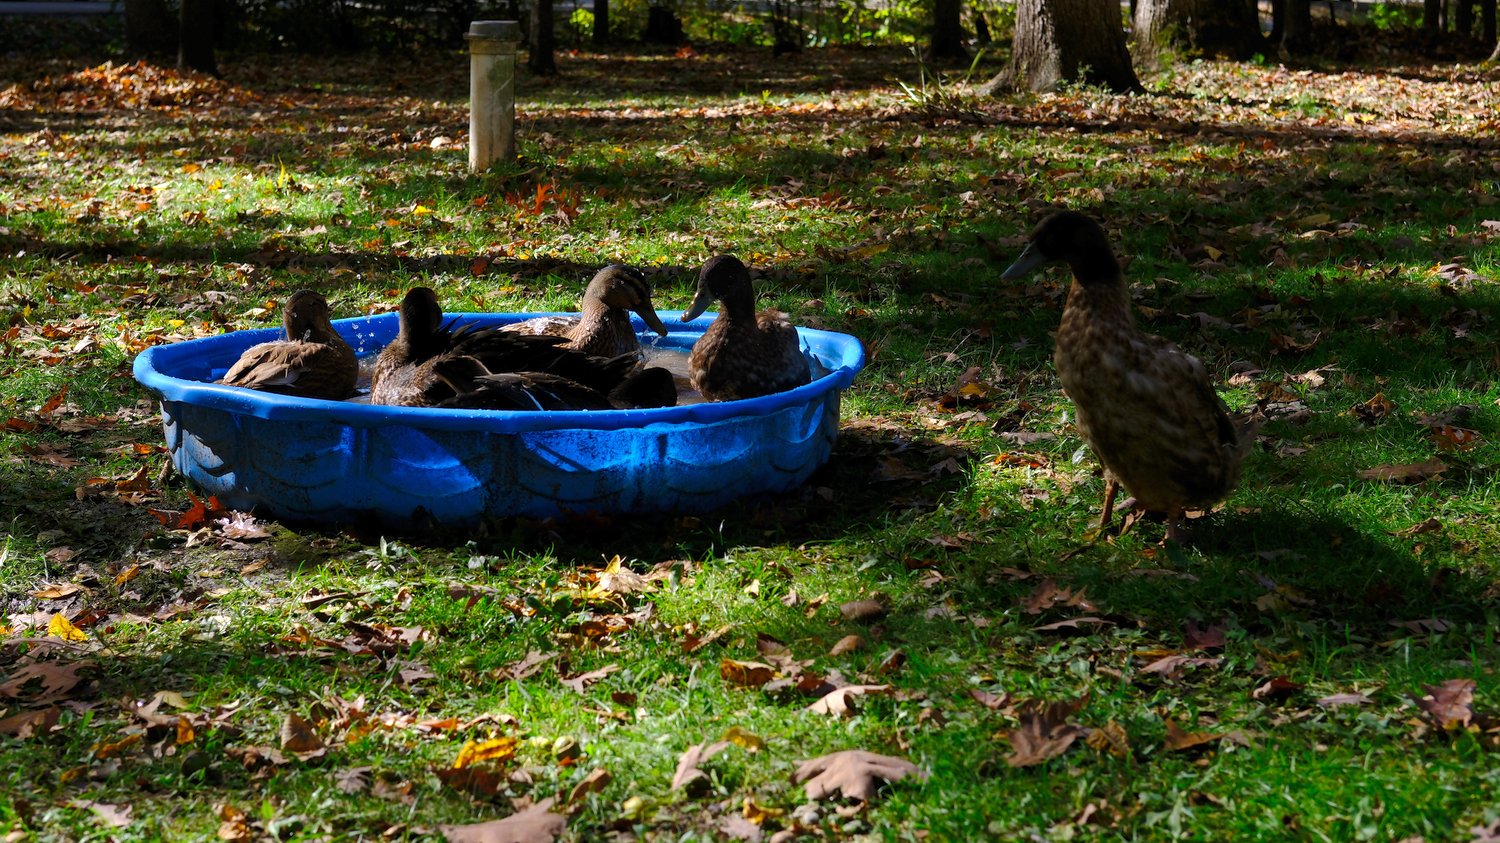 Kiddy pool with ducks in it.